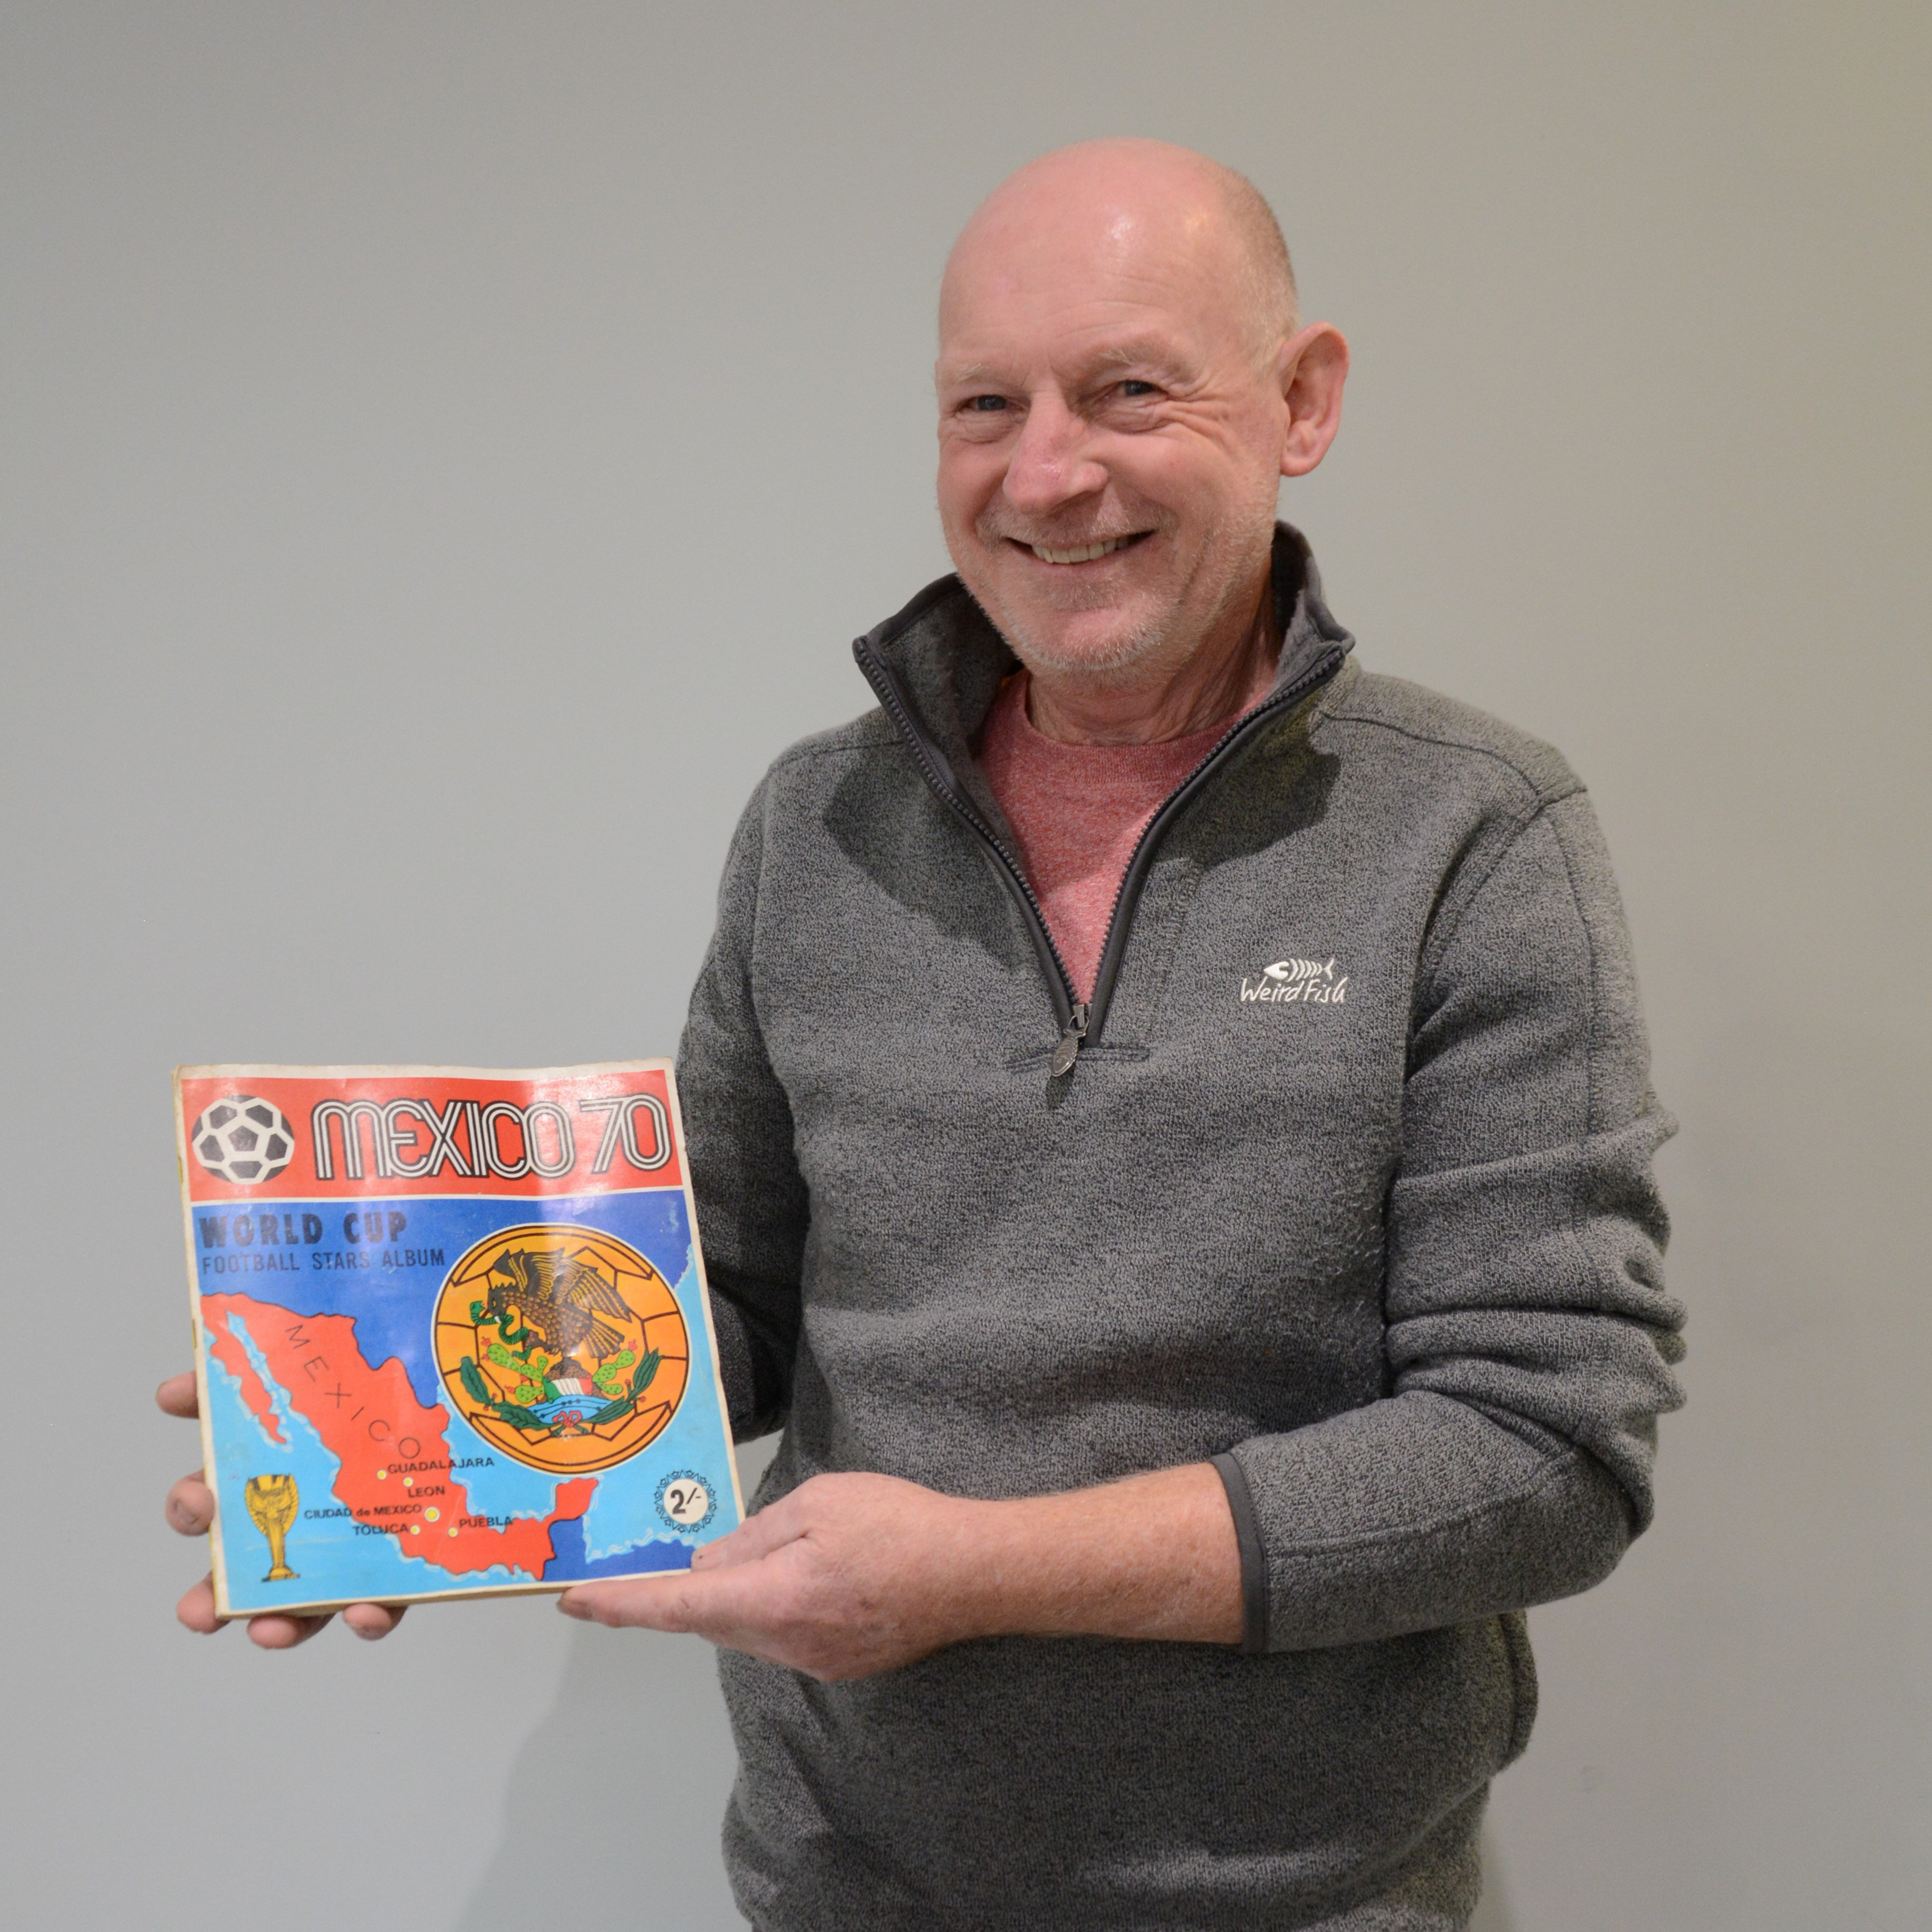 Andrew, of Arthingworth, Leicestershire, with the album tipped to sell for £1,800